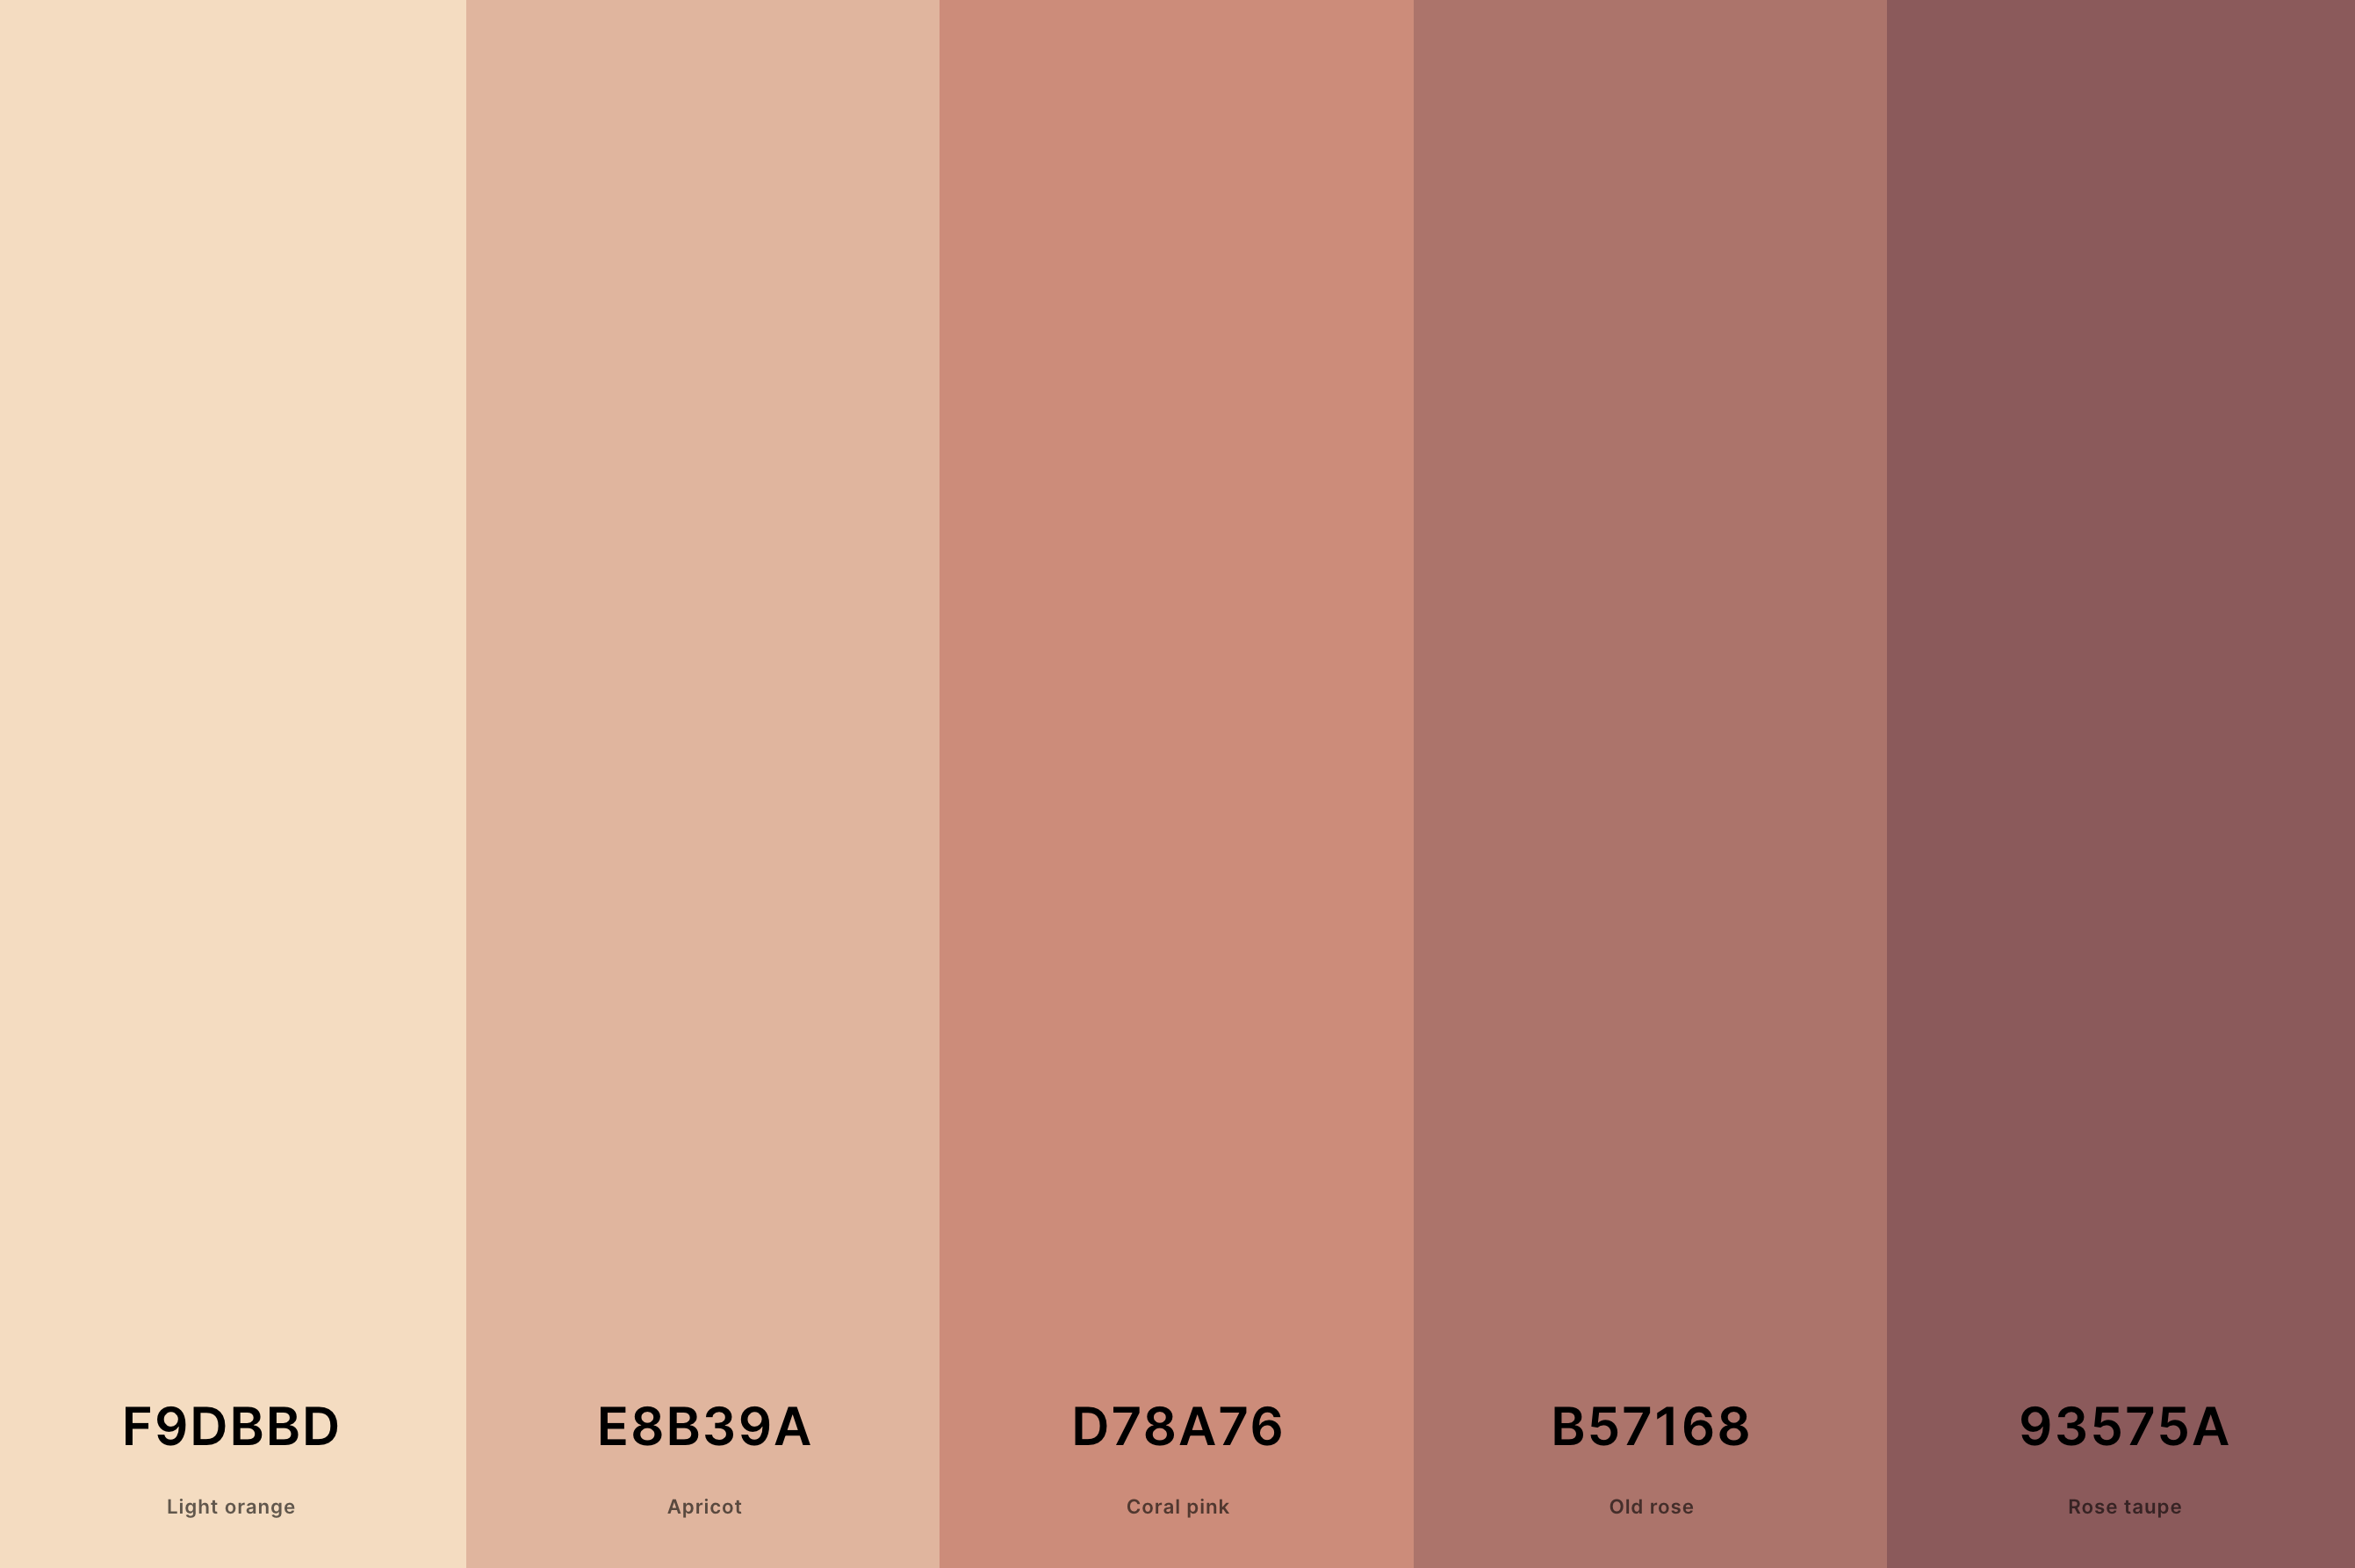 2. Warm Neutral Color Palette Color Palette with Light Orange (Hex #F9DBBD) + Apricot (Hex #E8B39A) + Coral Pink (Hex #D78A76) + Old Rose (Hex #B57168) + Rose Taupe (Hex #93575A) Color Palette with Hex Codes